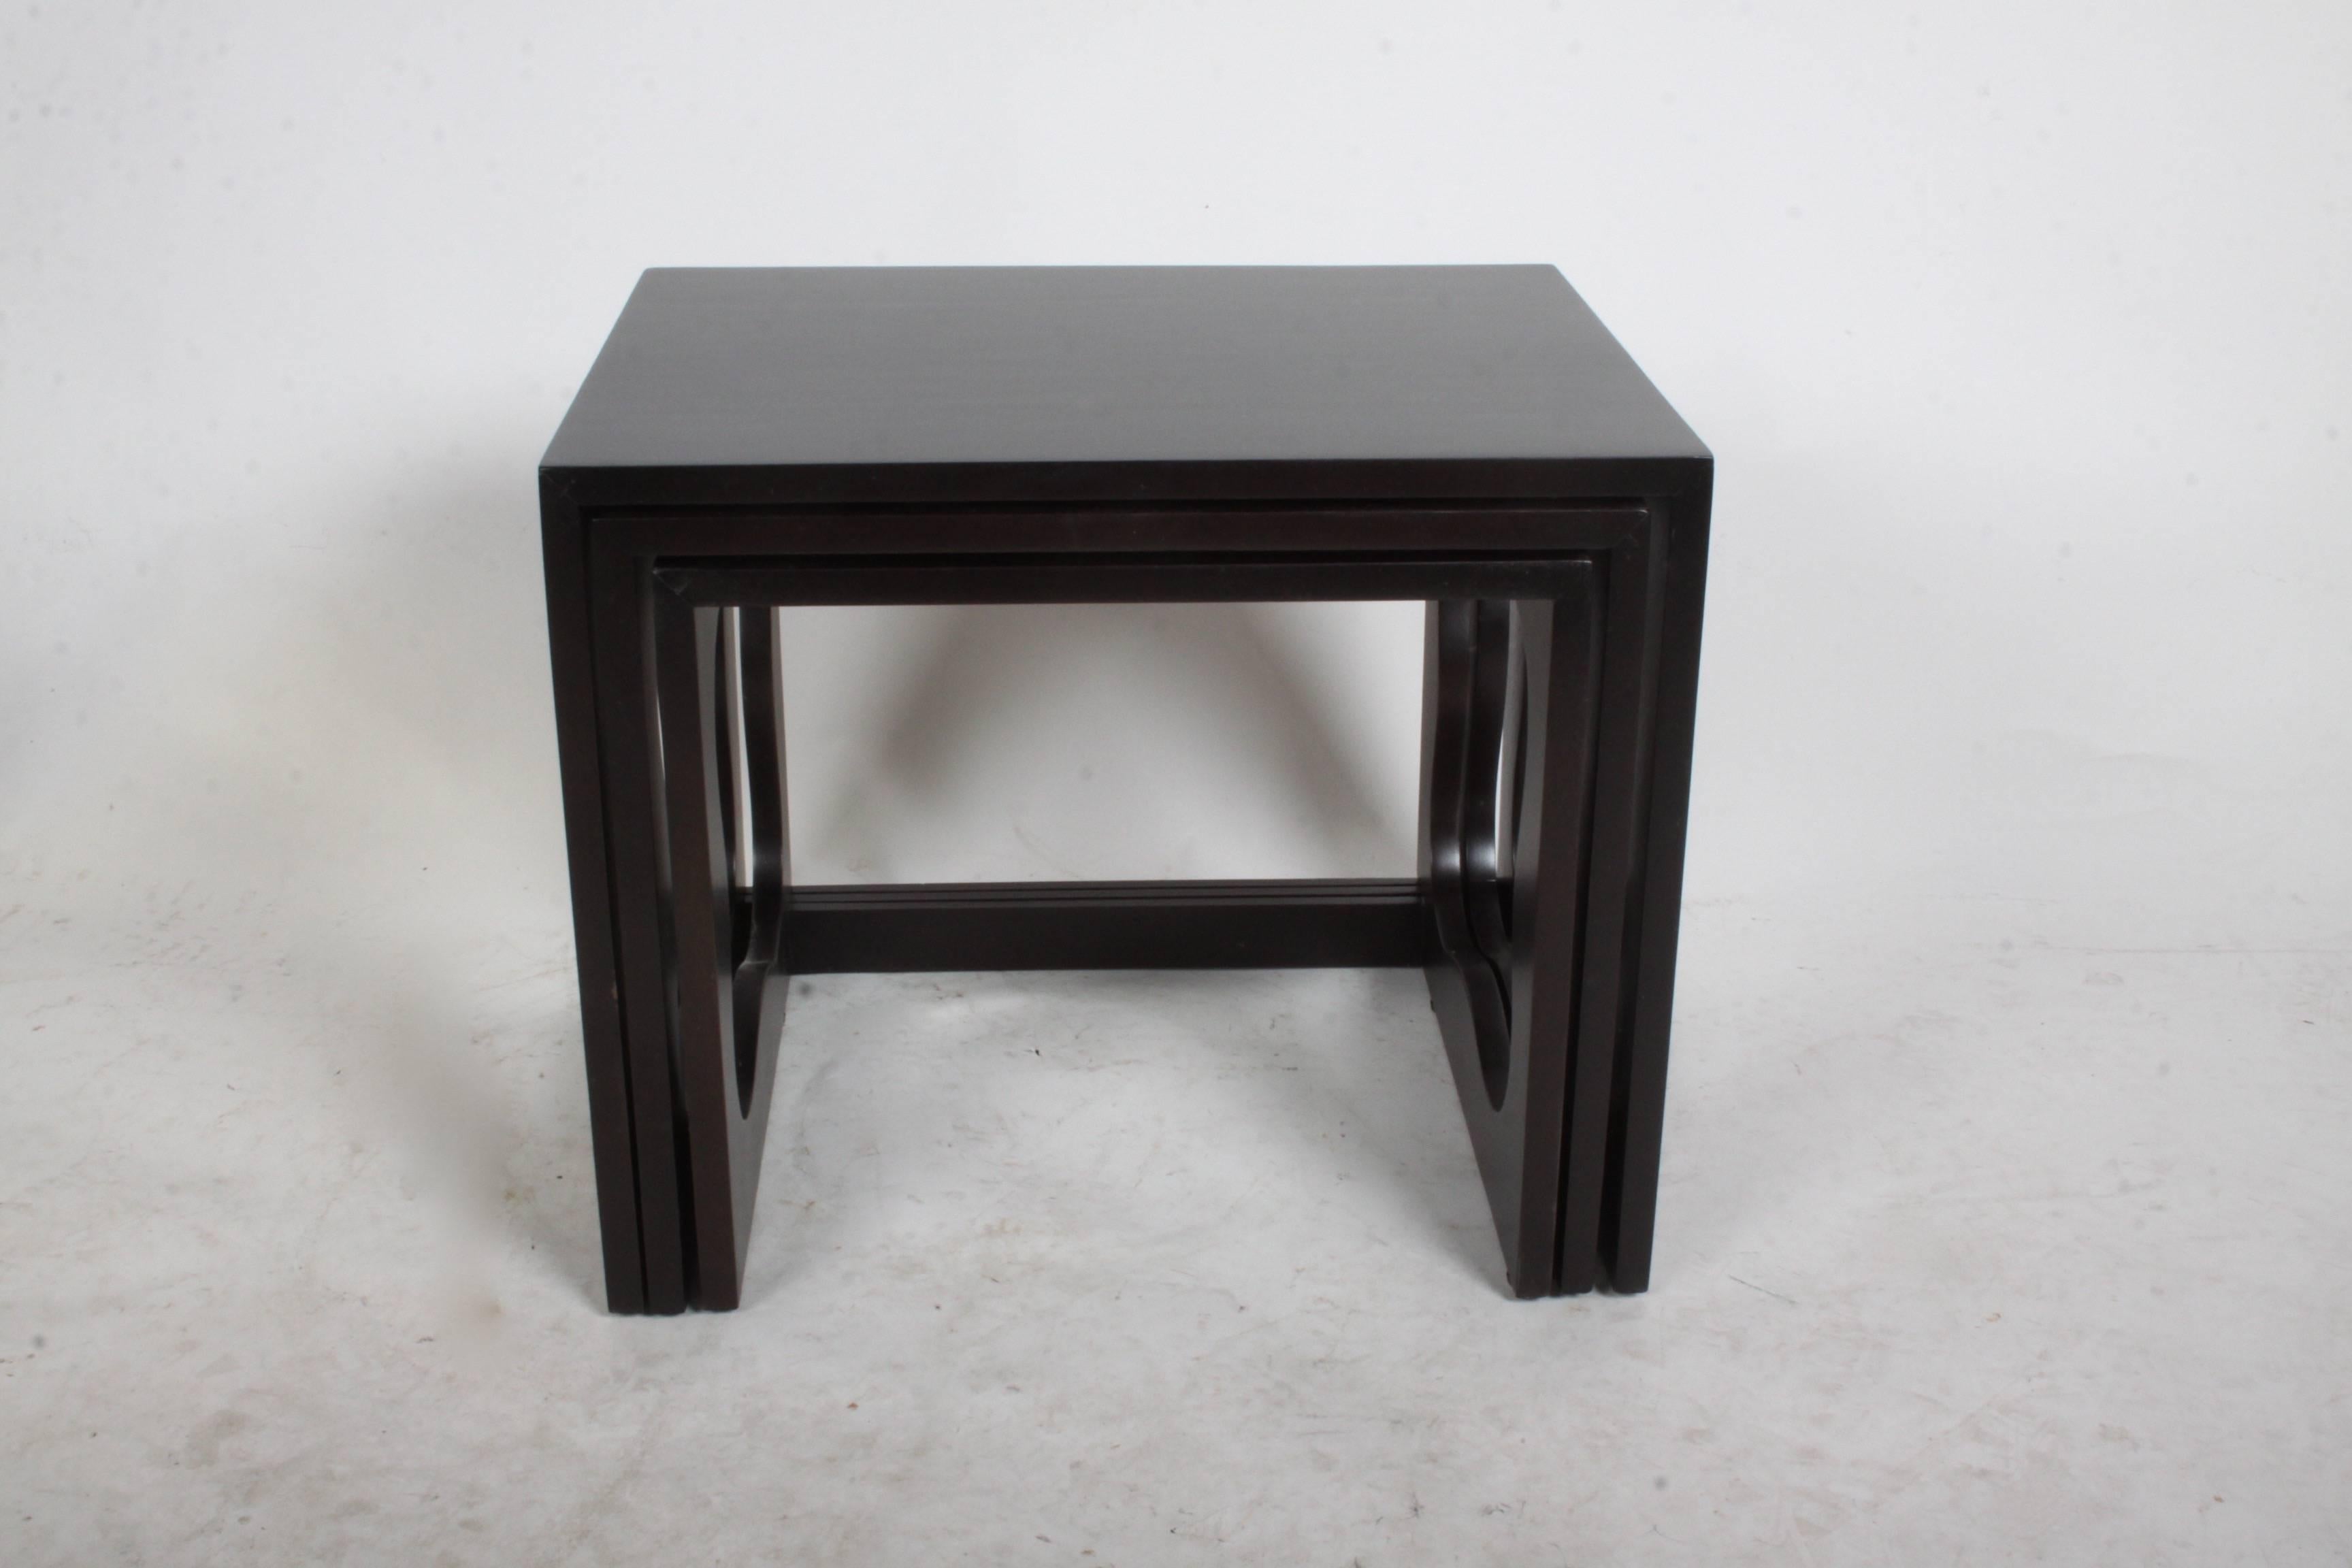 Set of three nesting tables by Dorothy Draper. Refinished in a dark espresso finish. 

Measures: Large: 18